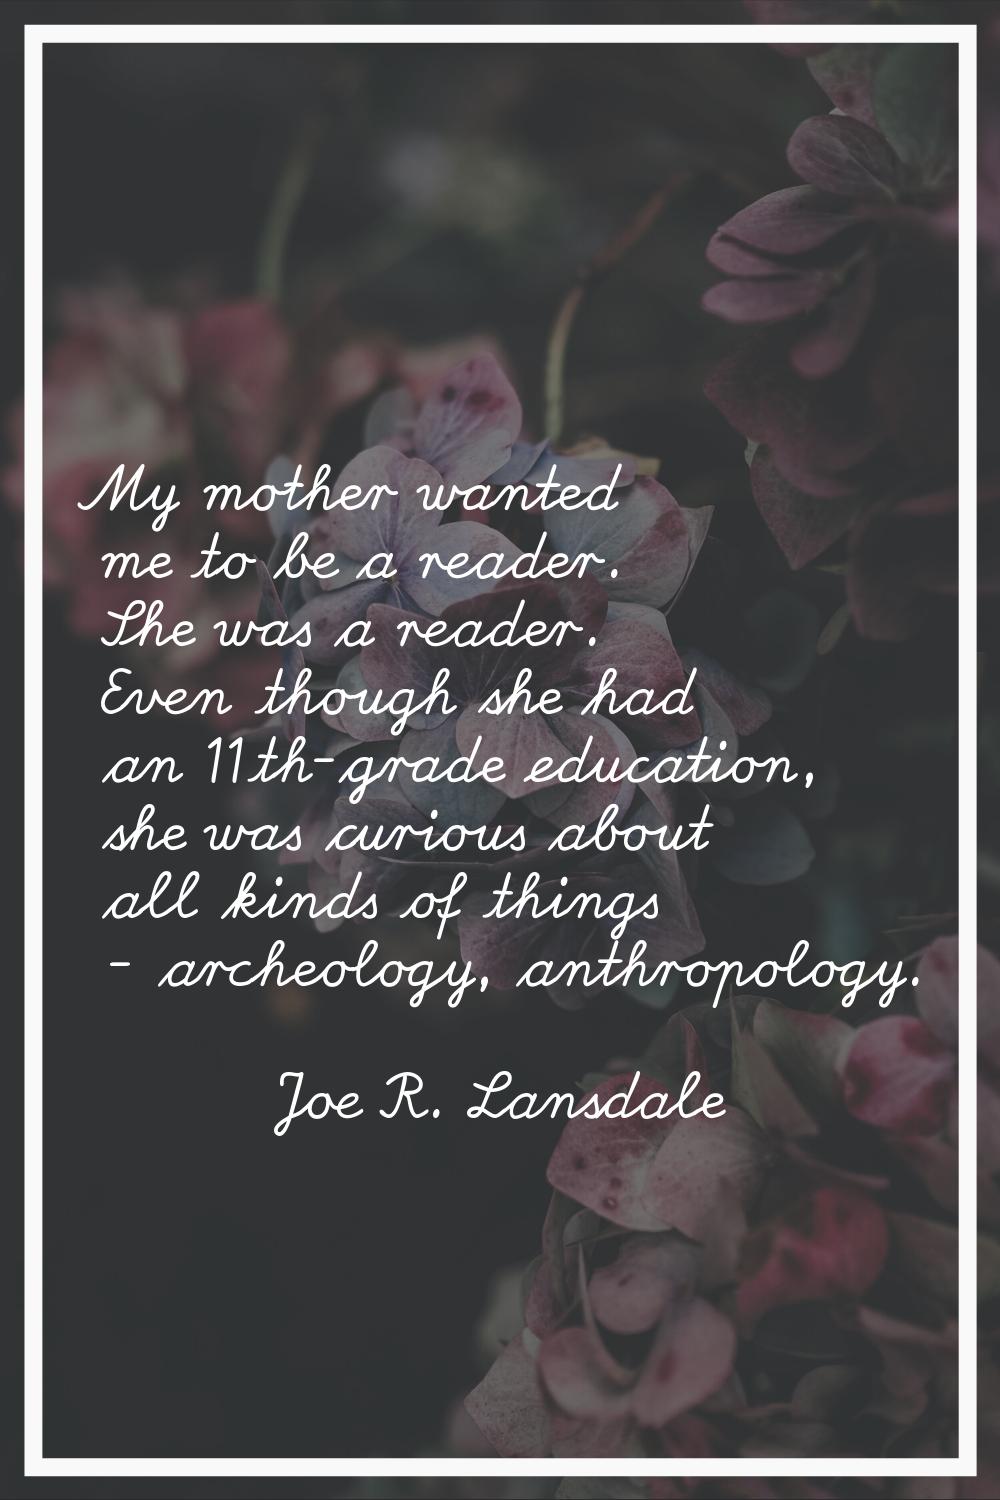 My mother wanted me to be a reader. She was a reader. Even though she had an 11th-grade education, 